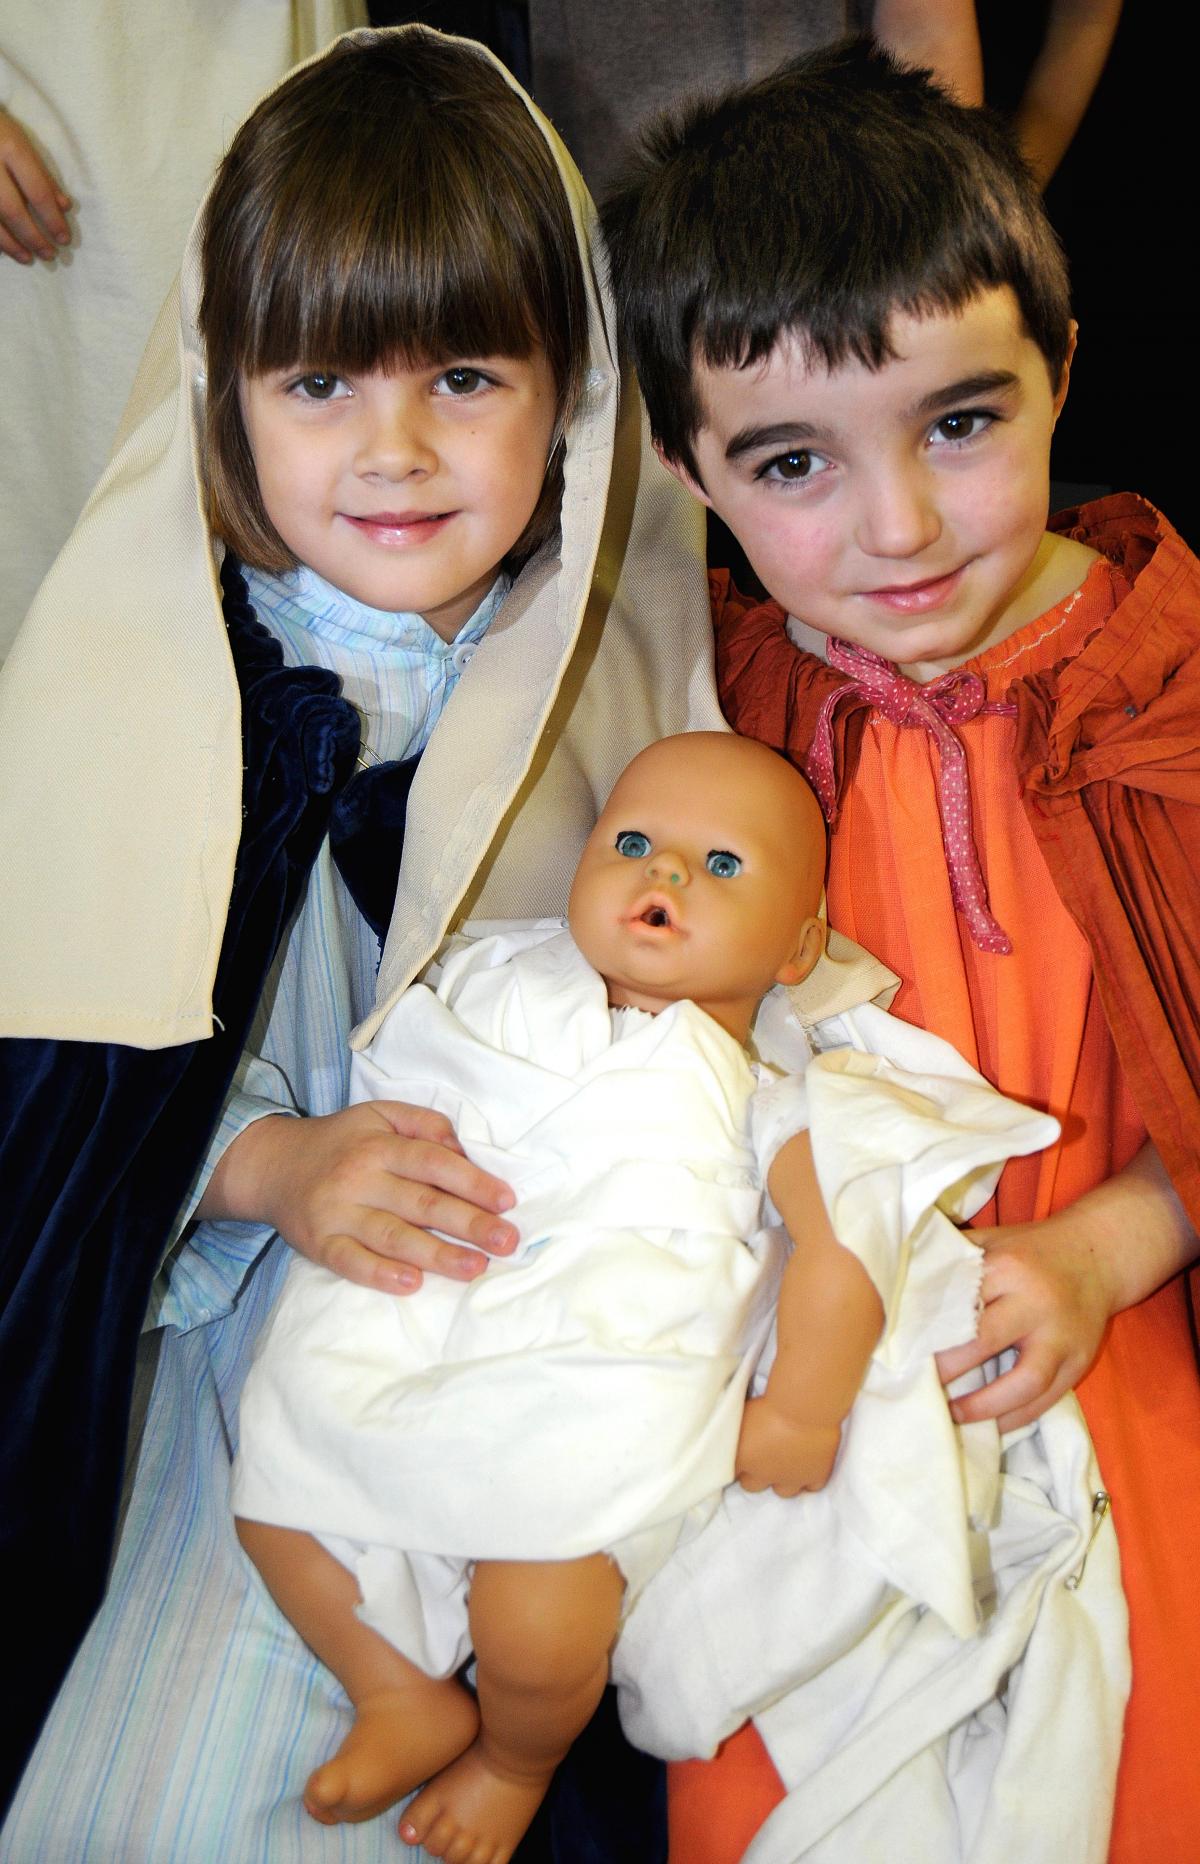 Playing Mary and Joseph in Menston Primary School Nativity 'The Little Owl and the Star' were Sophie Robson and Joseph Bevan